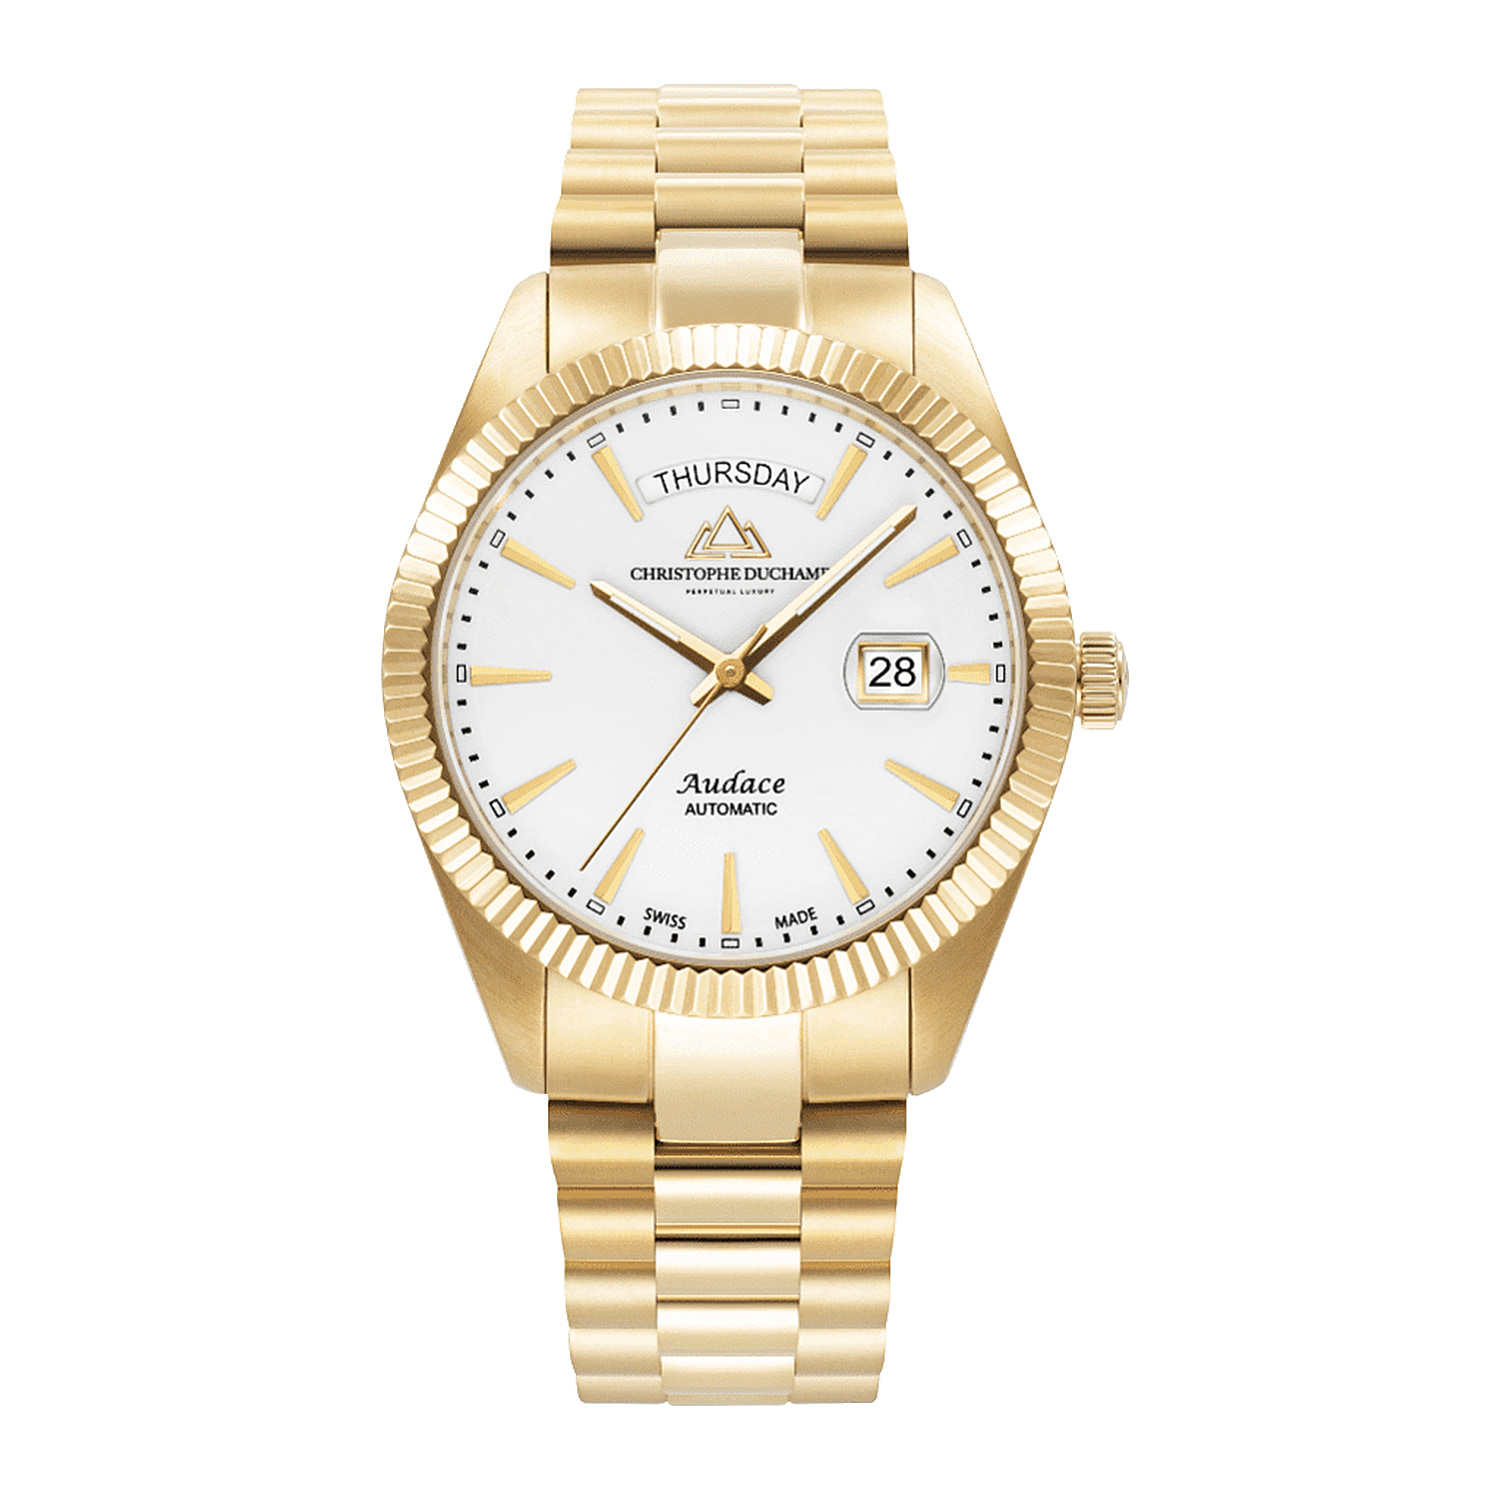 Christophe Duchamp Audace White Dial Automatic Movt. 10 ATM Water Resistant Watch with Gold Bracelet